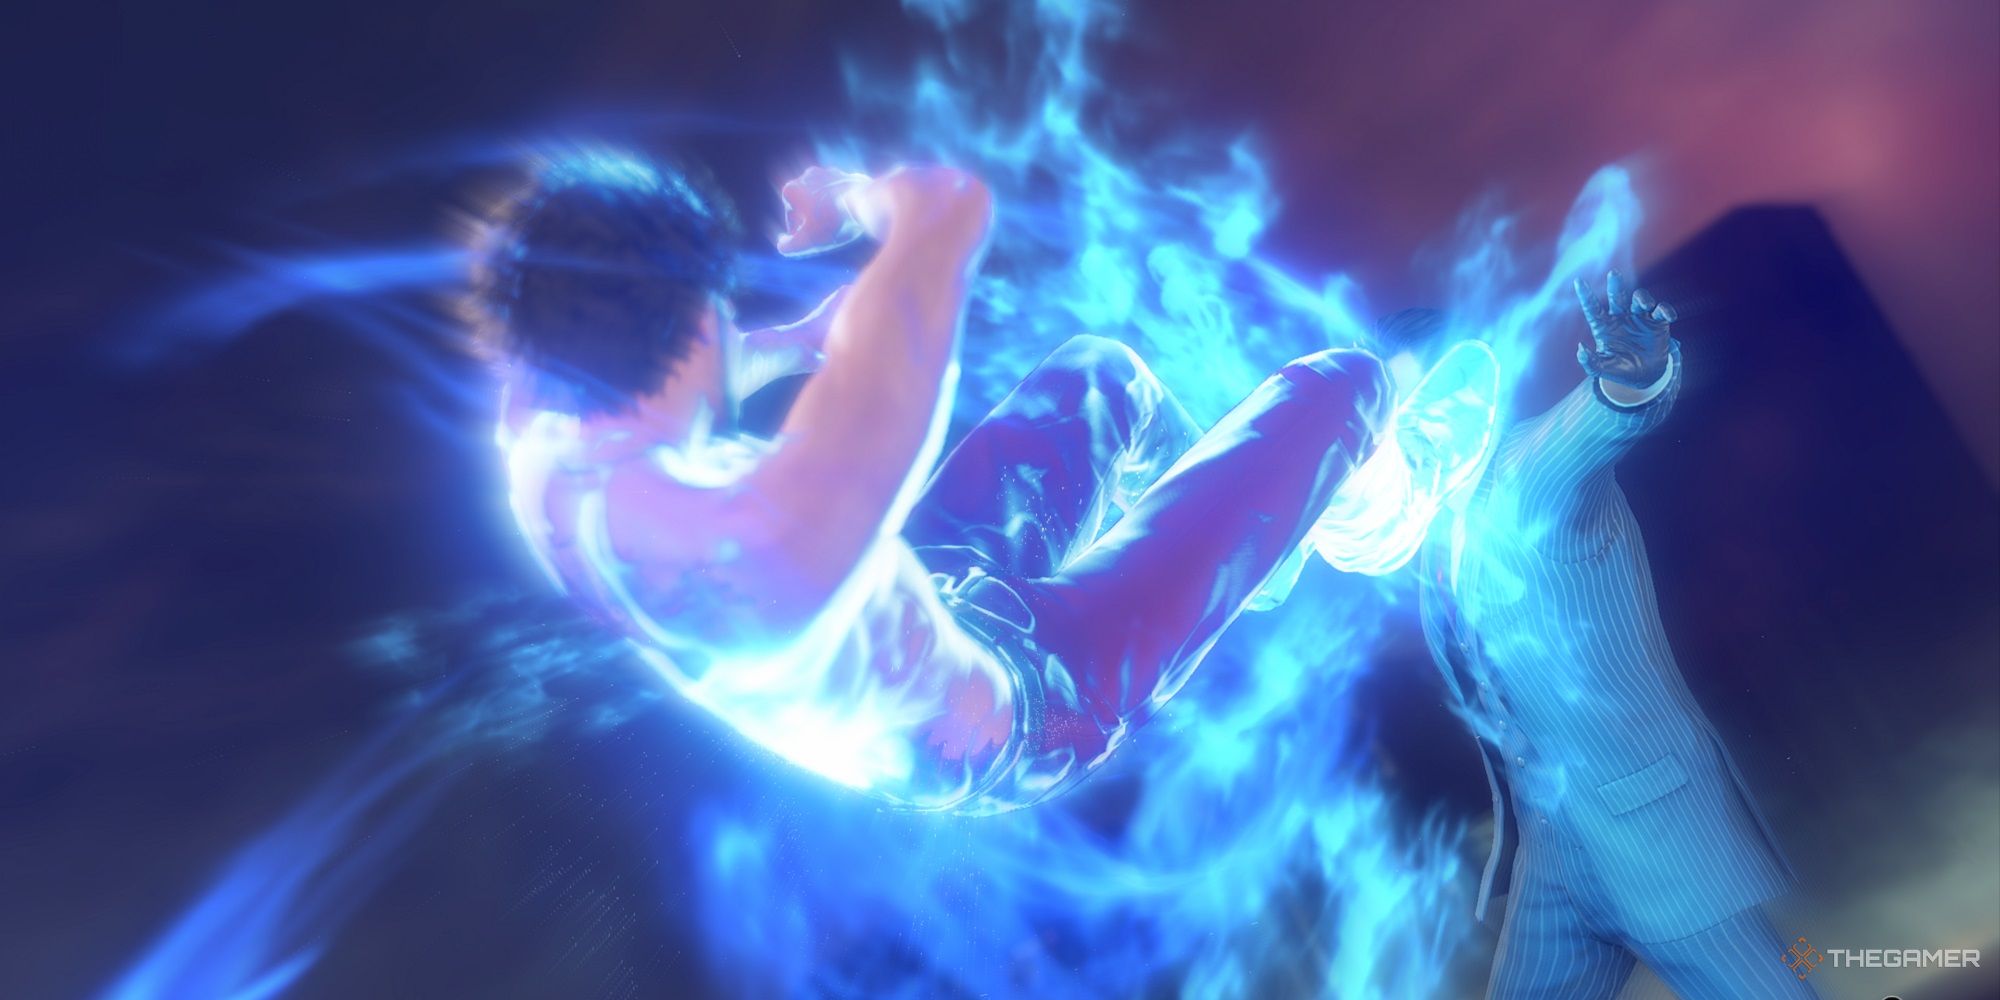 ichiban two-footed kicking an opponent while shrouded in blue fire in yakuza like a dragon-1